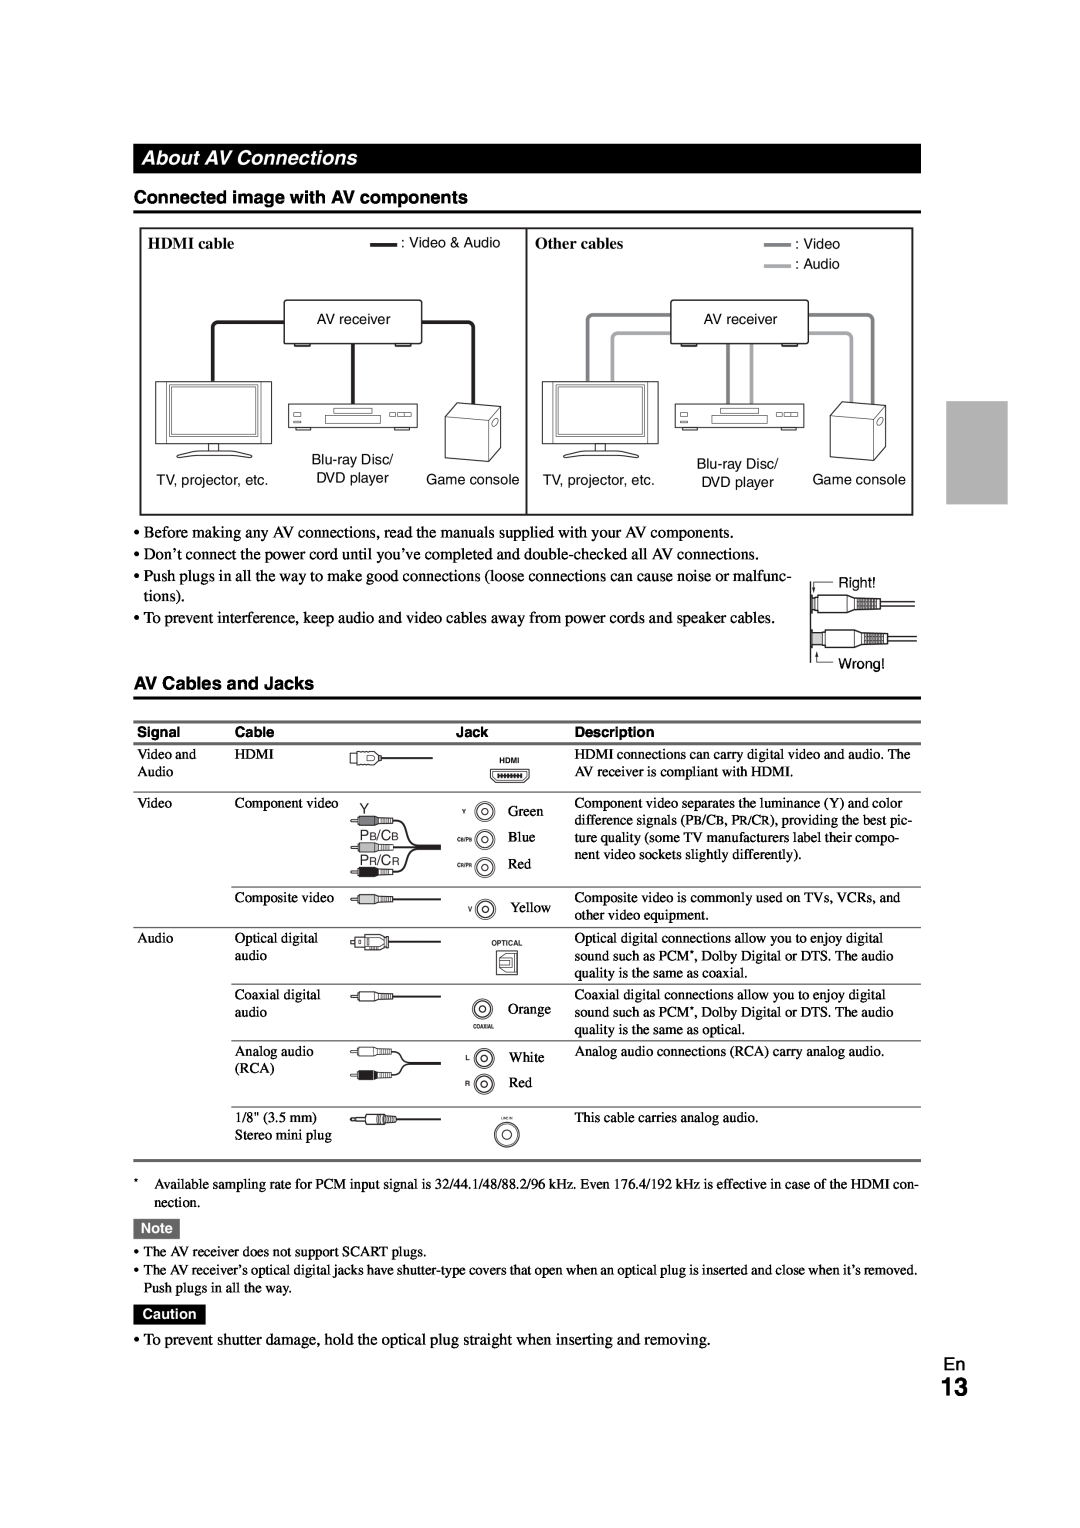 Onkyo 29400468 instruction manual About AV Connections, Connected image with AV components, AV Cables and Jacks 